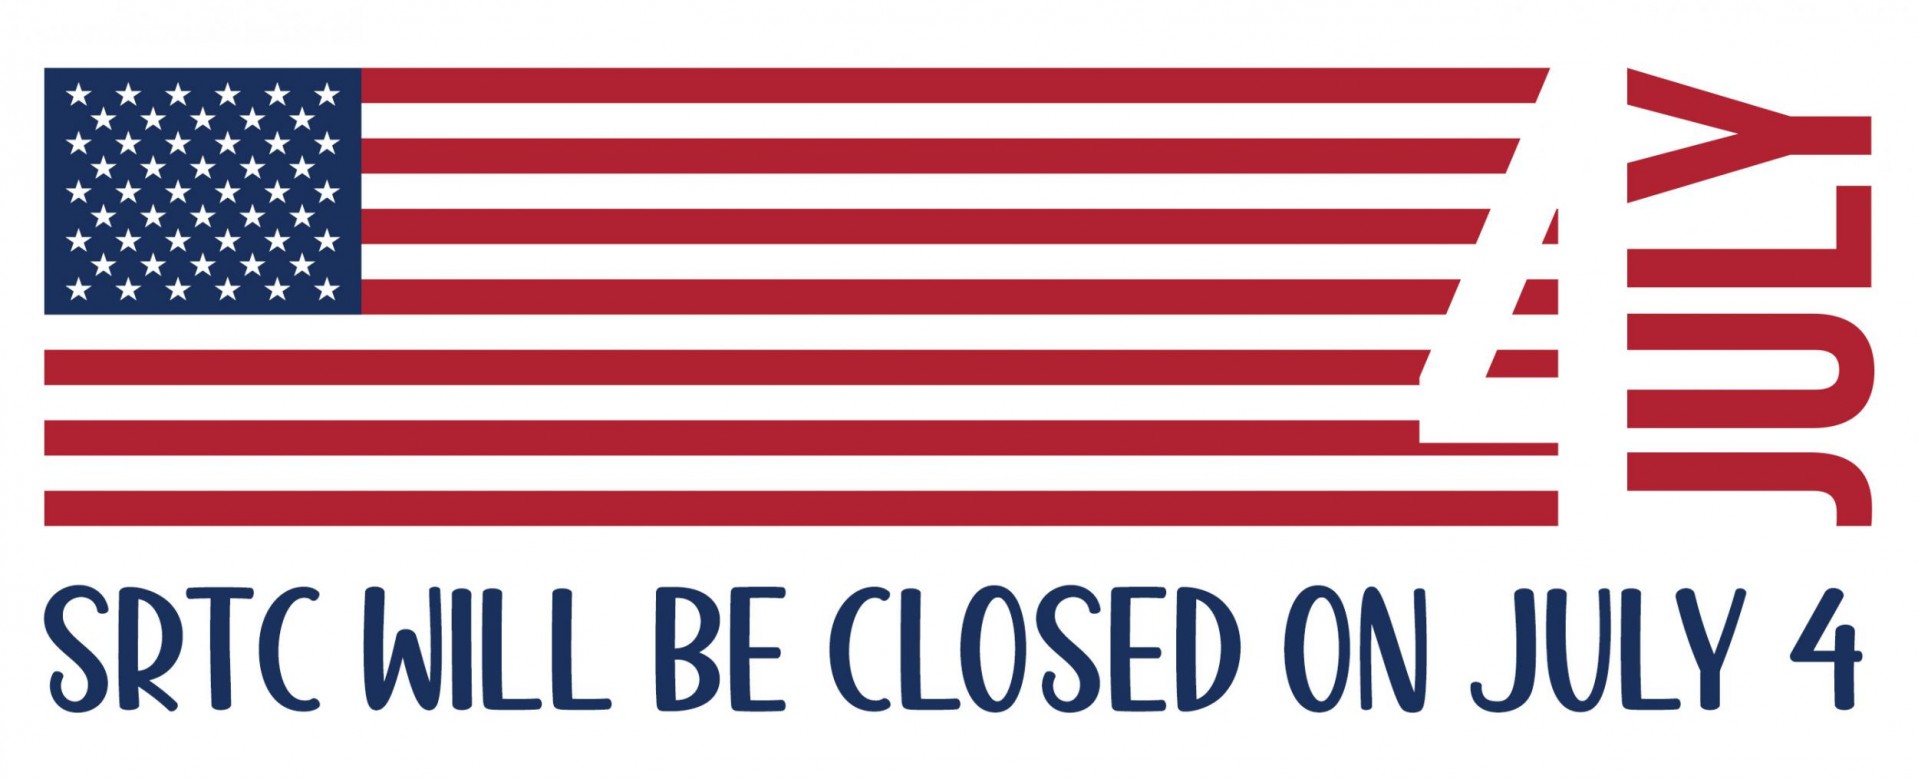 SRTC will be closed on Thursday, July 4th!